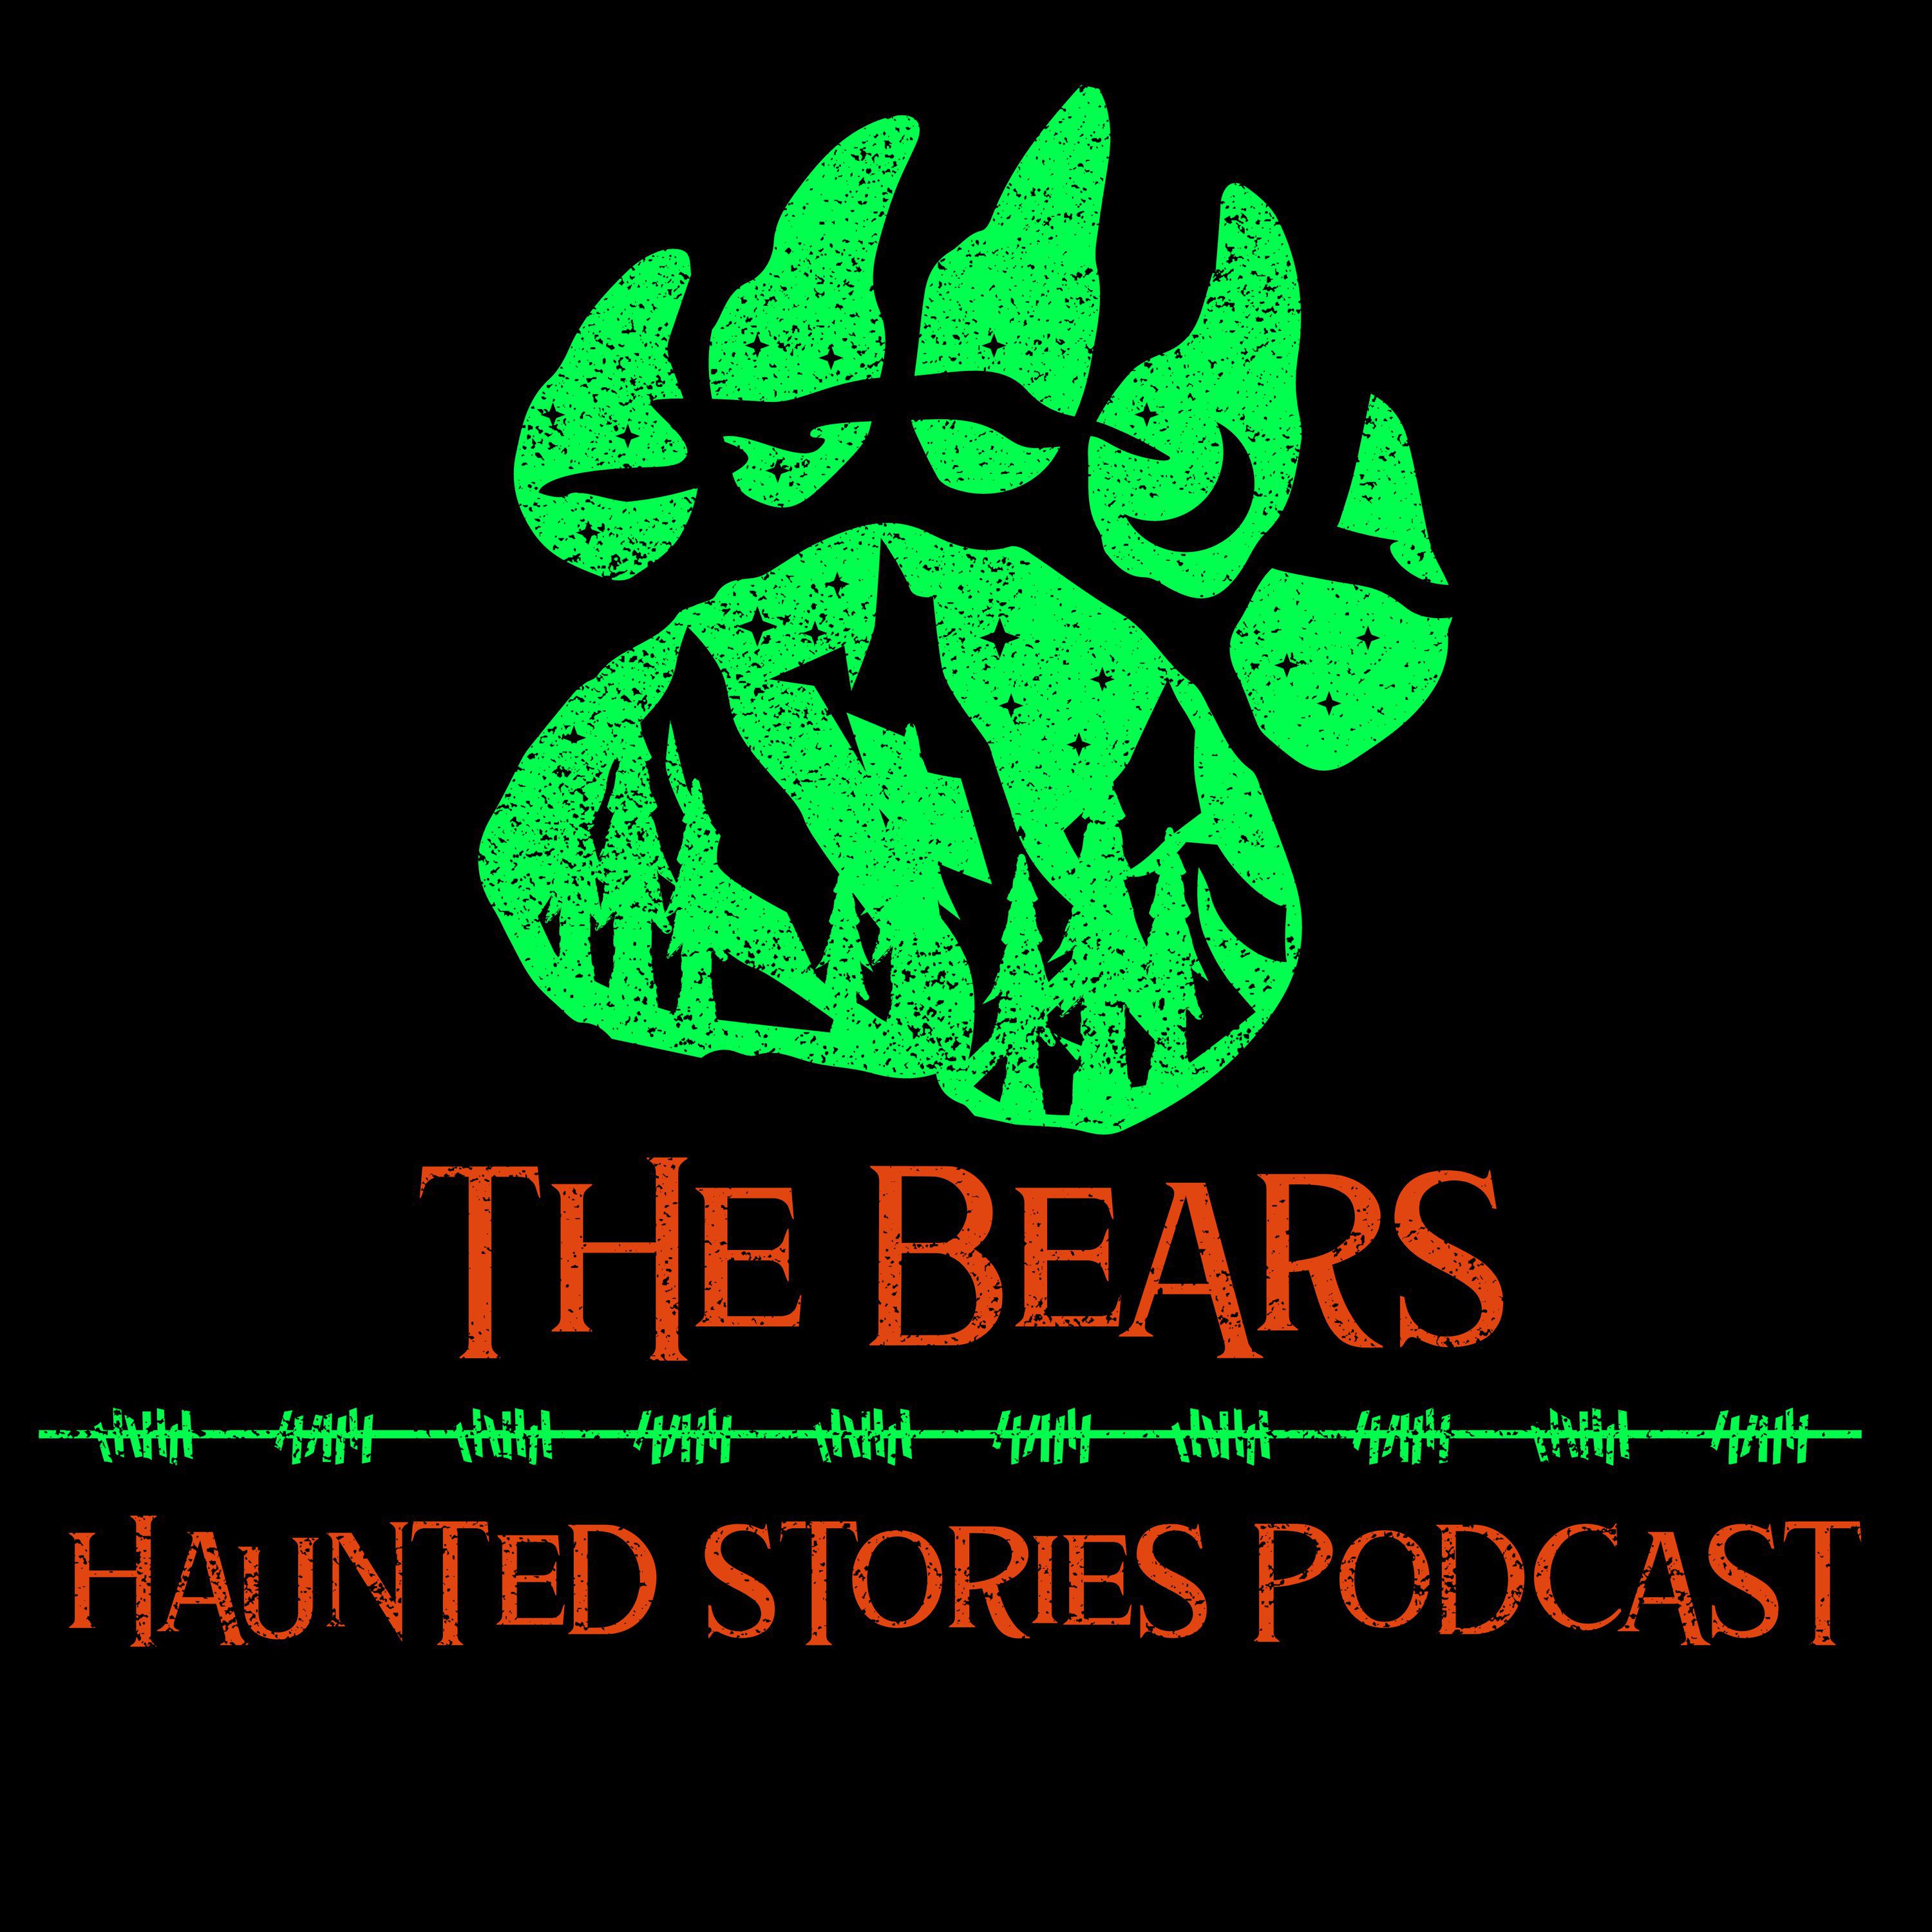 The Bears Haunted Stories Podcast